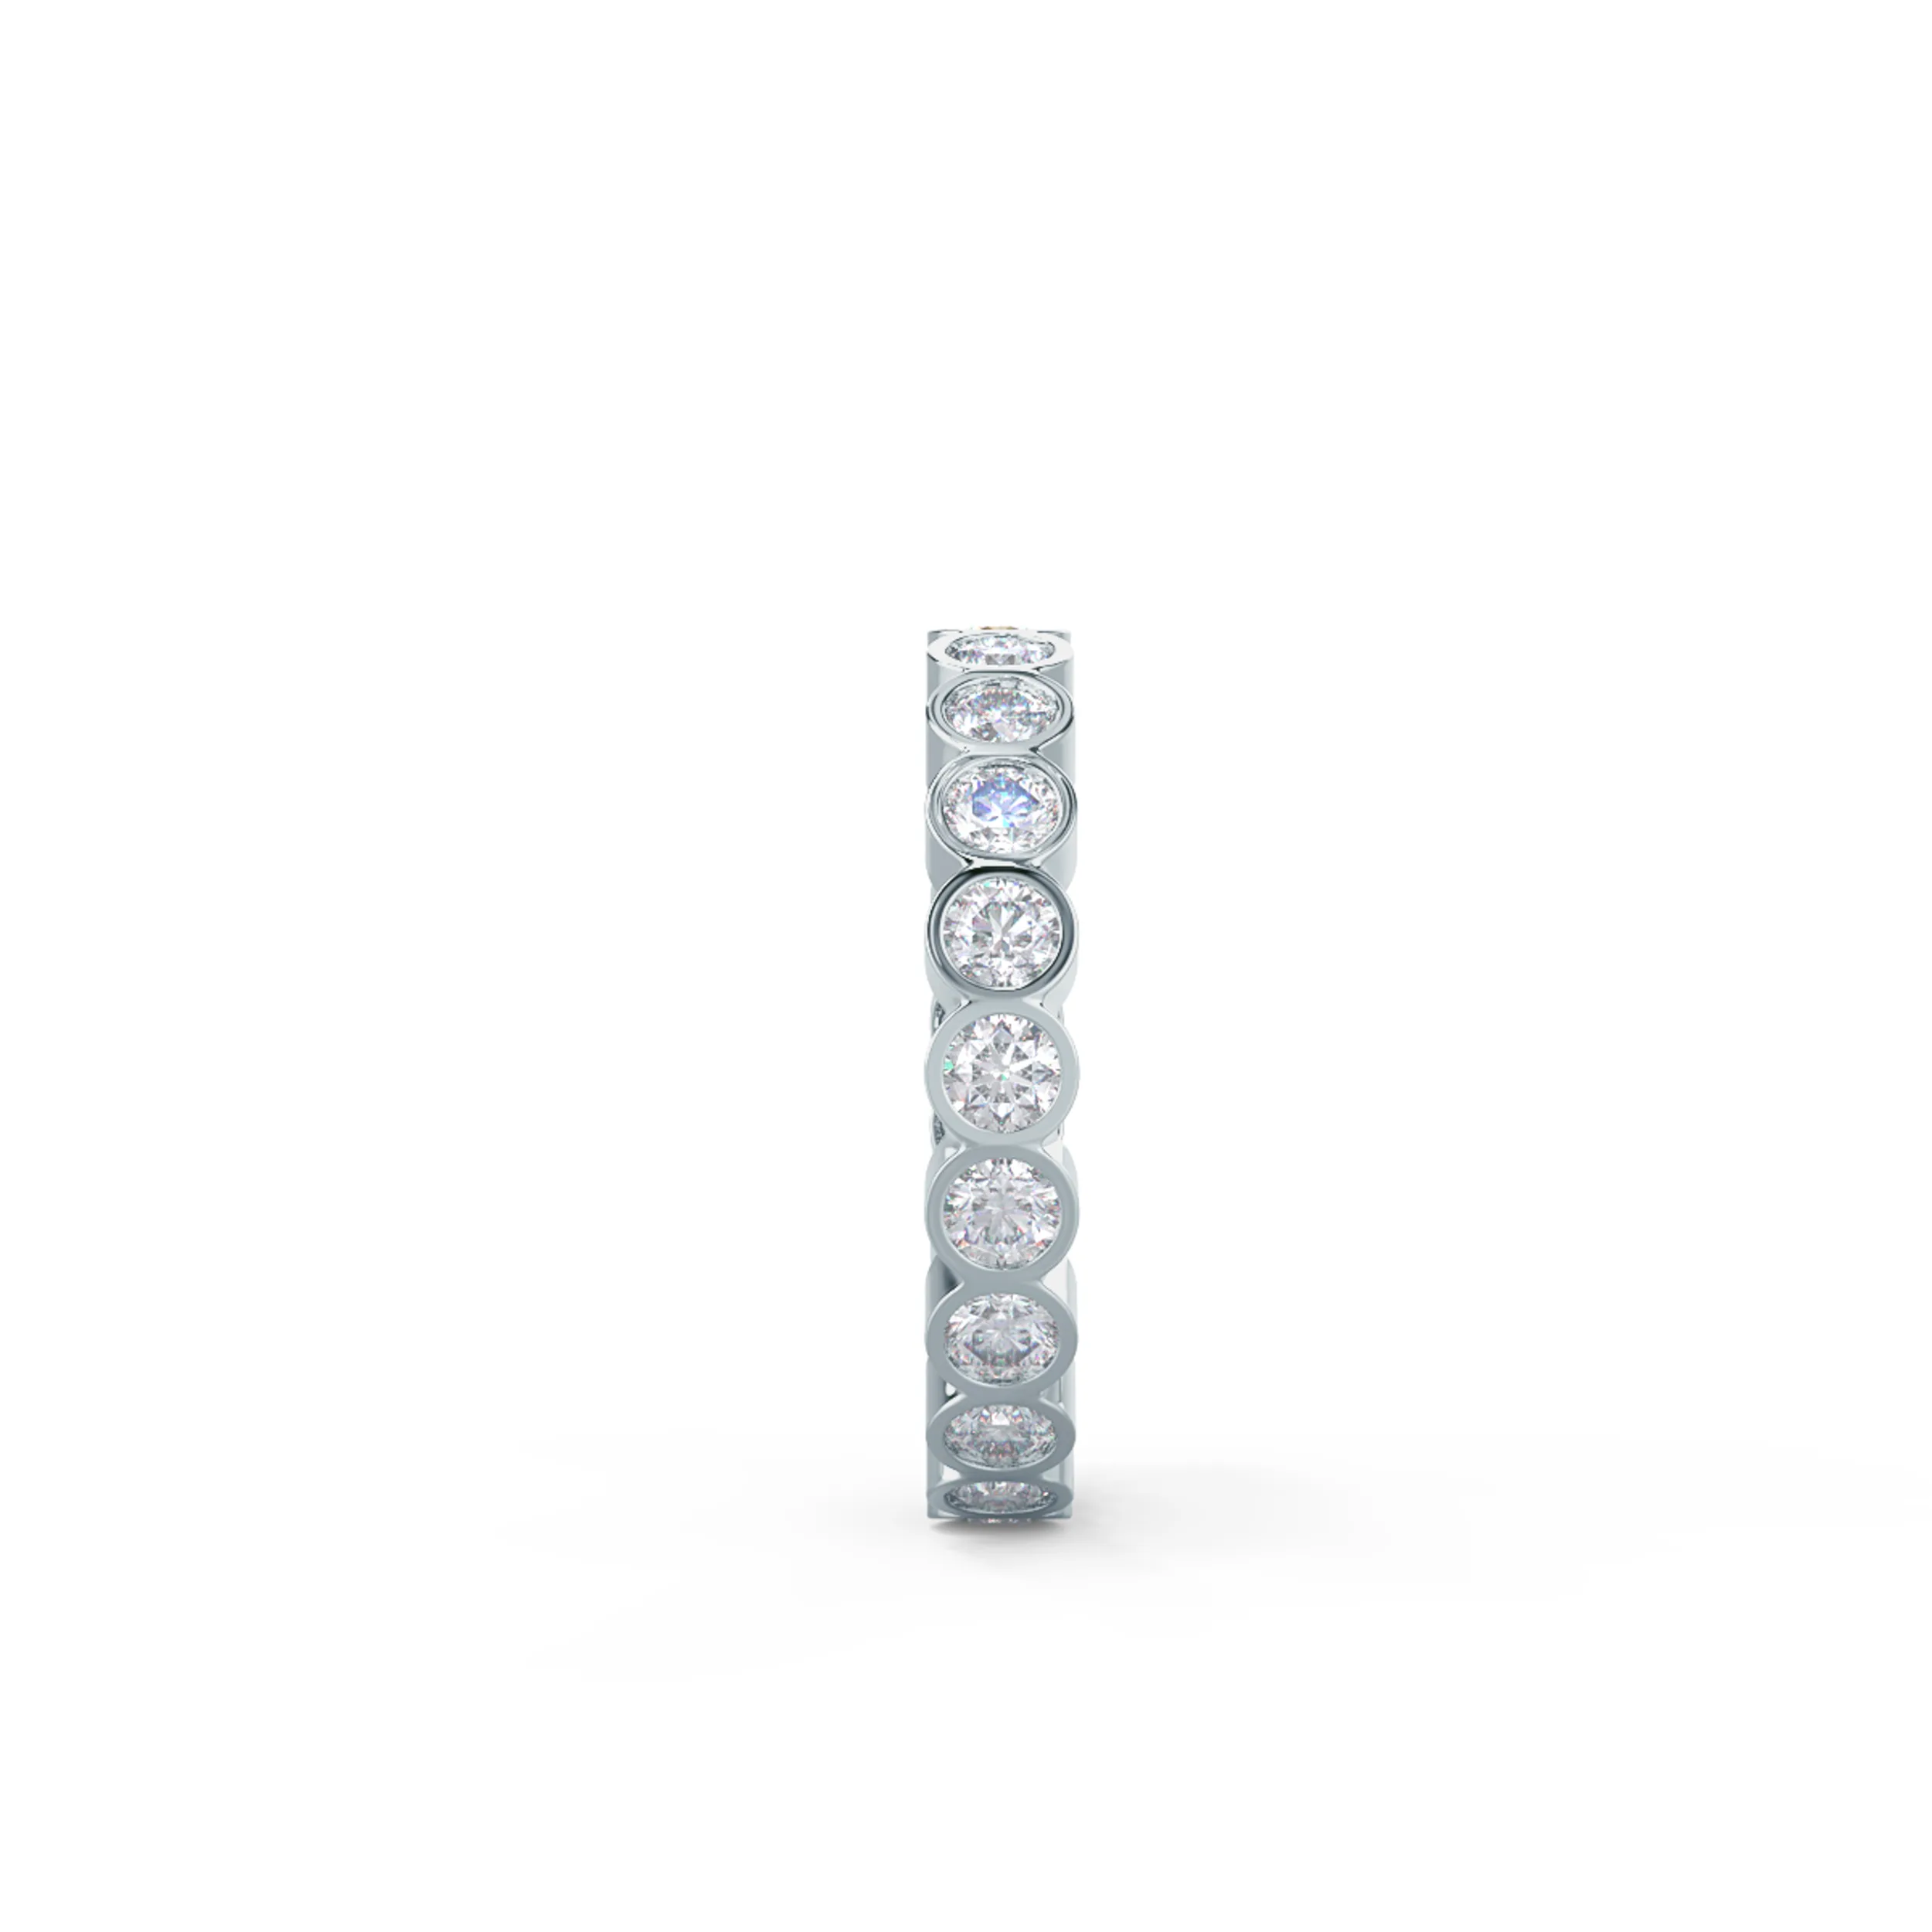 Exceptional Quality 1.0 ct Round Brilliant Diamonds Bezel Eternity Band in White Gold (Side View)